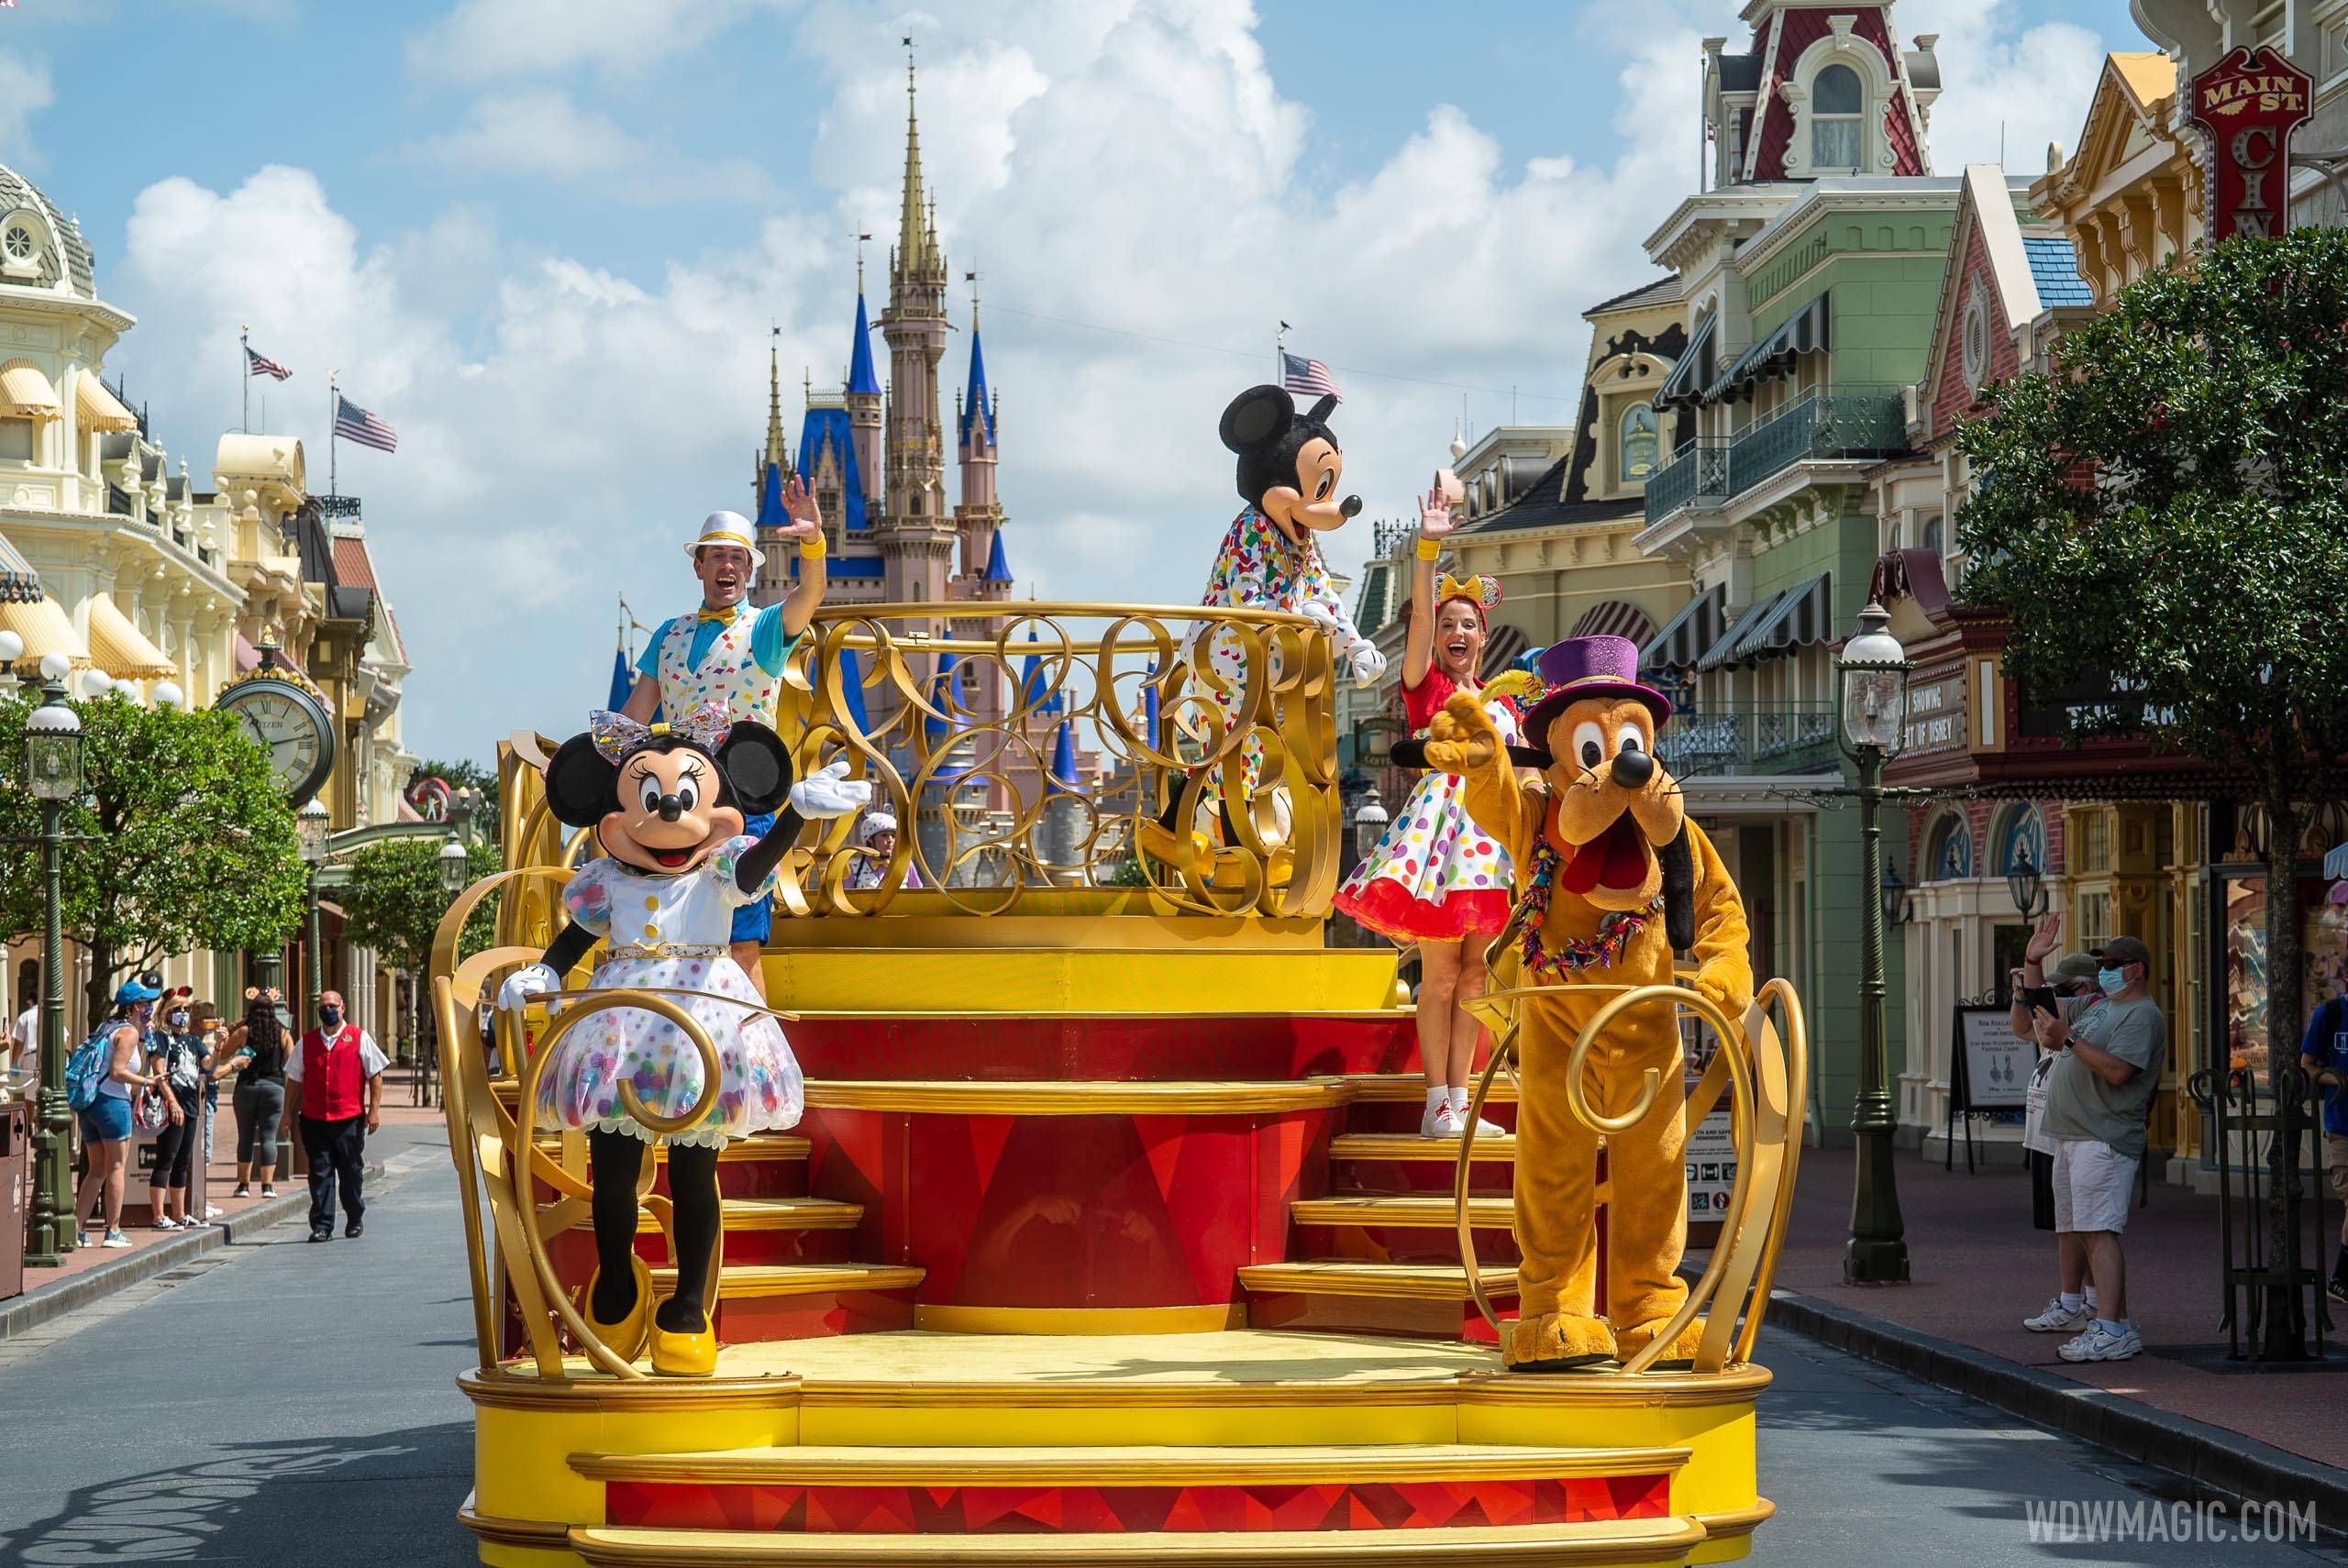 VIDEO - A look at the Magic Kingdom's new entertainment line-up